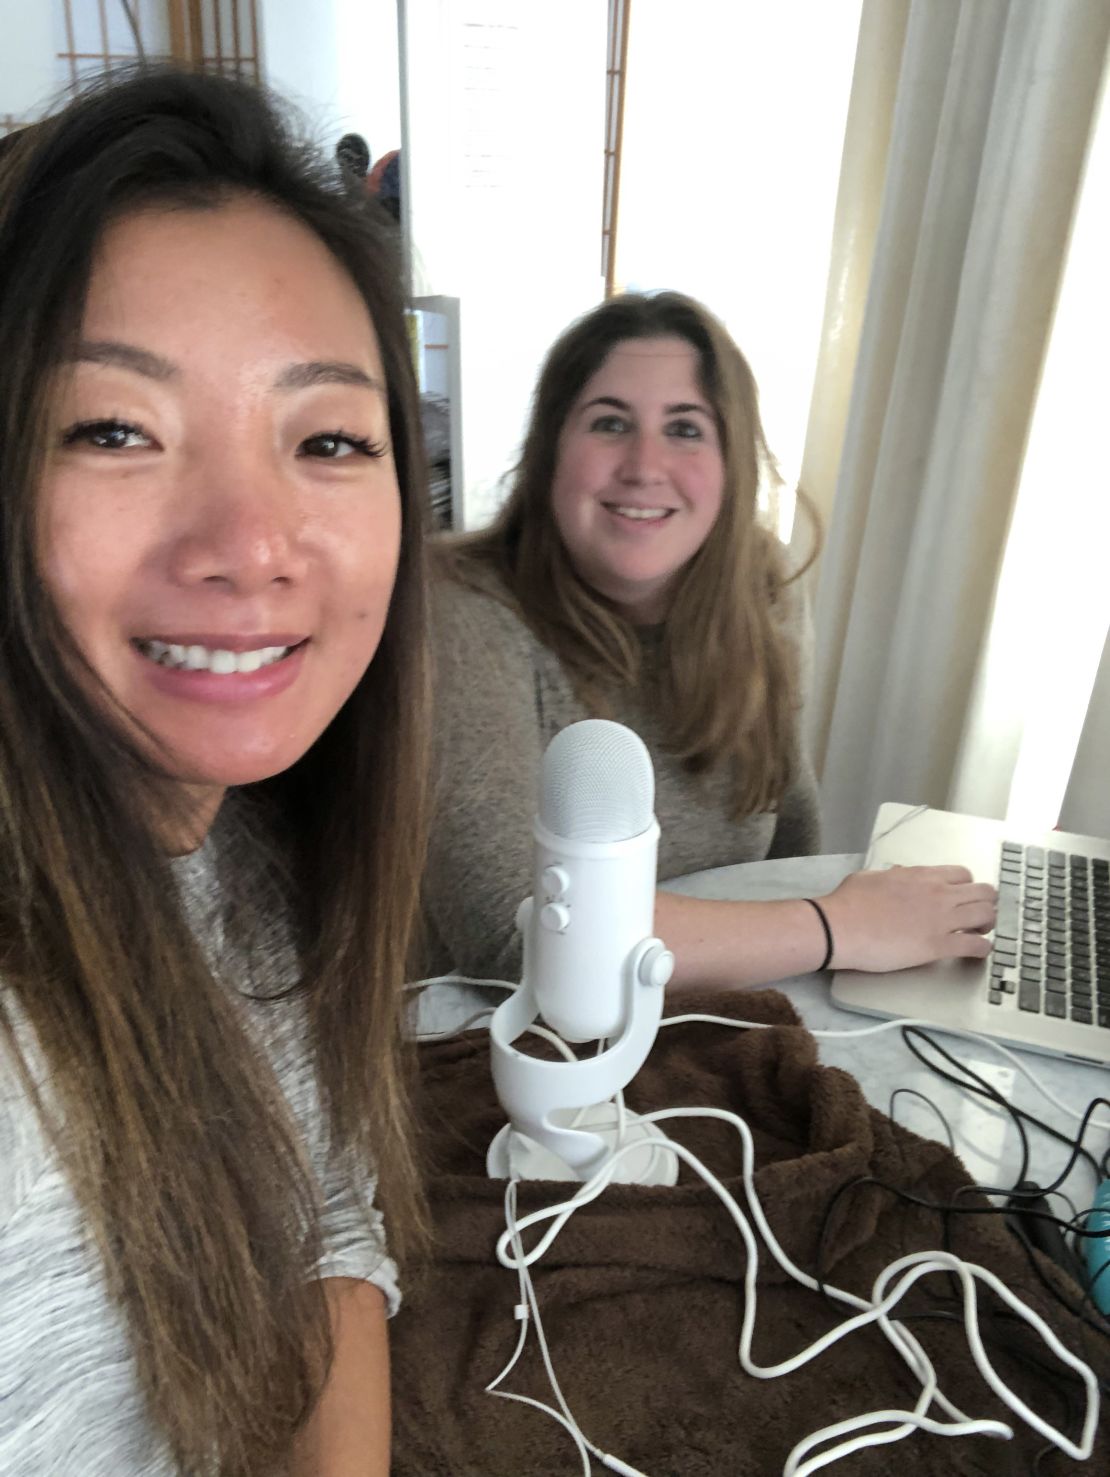 Yue Xu and Julie Krafchick take a selfie while hosting their podcast.